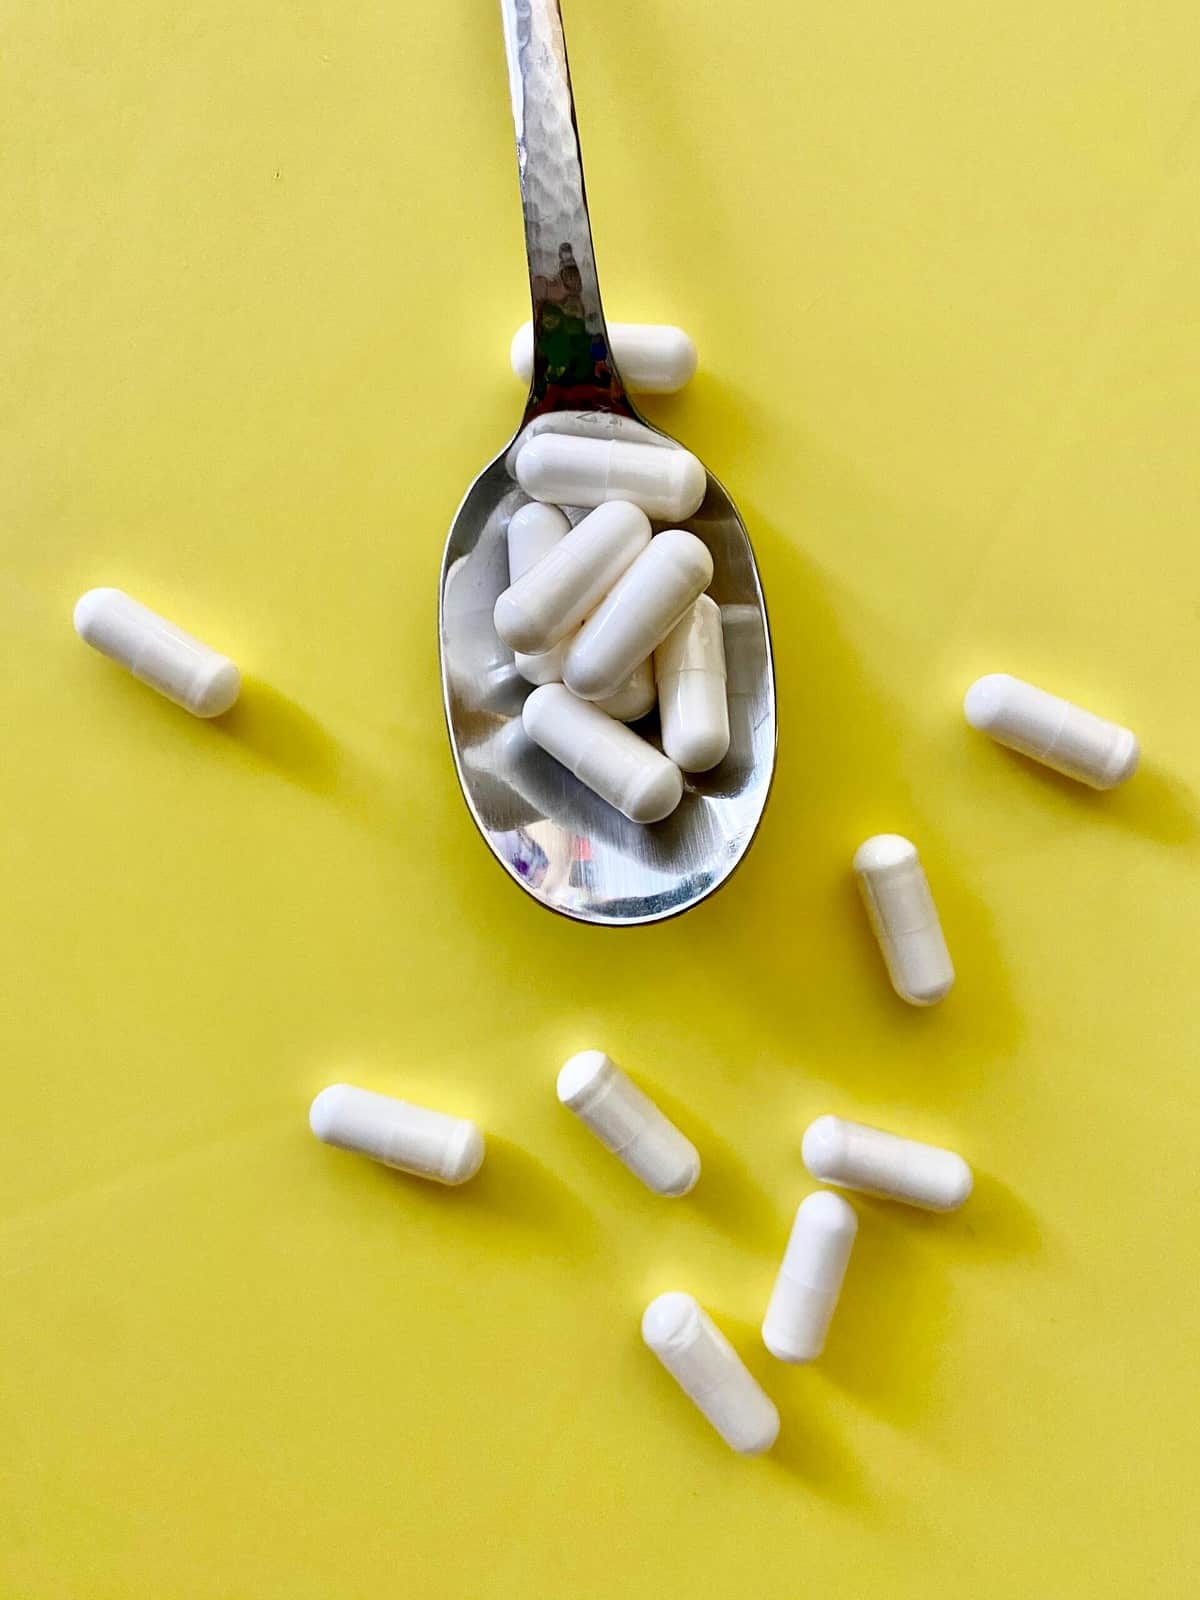 Collagen supplements on a silver spoon against a yellow background.